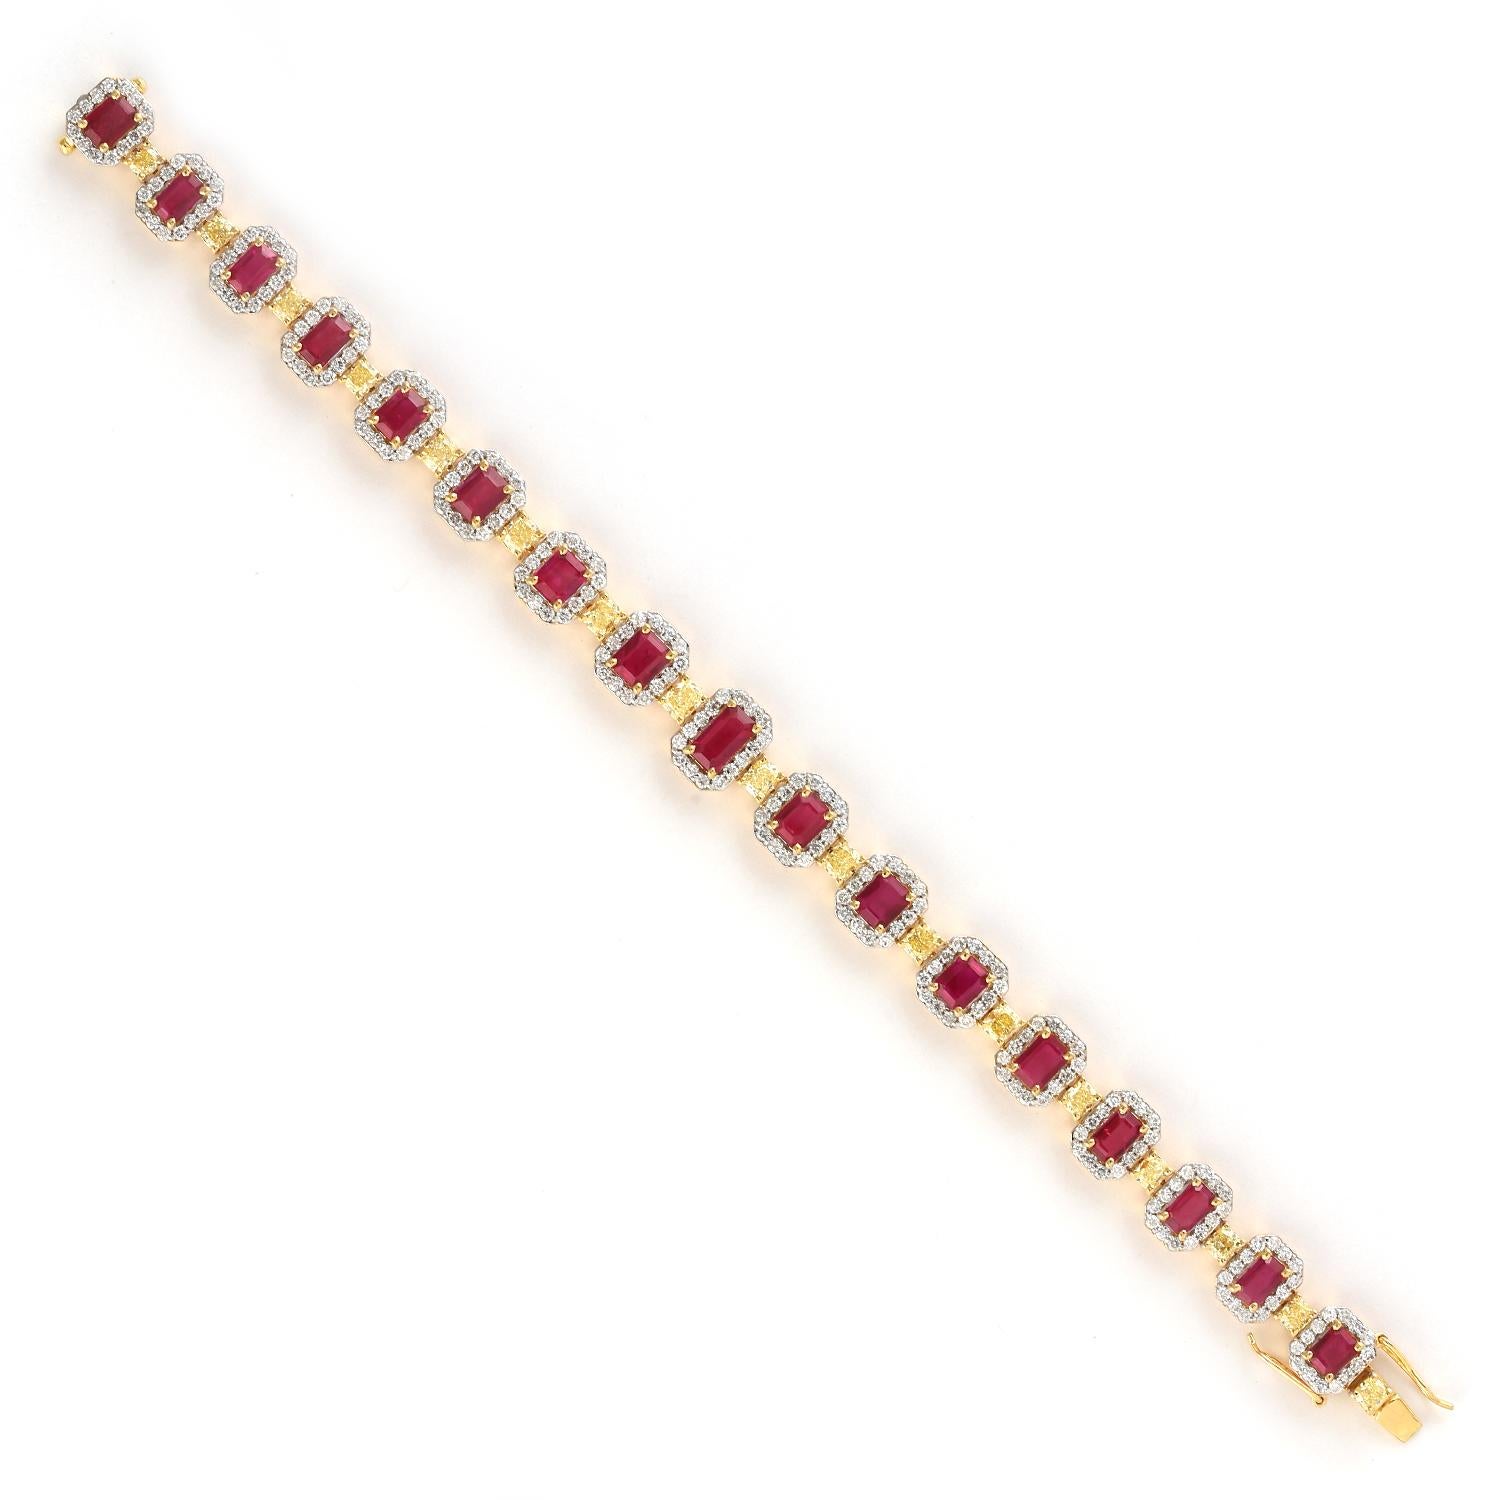 Modern Classic Emerald Cut Ruby Tennis Bracelet with Diamonds Made in 18K Yellow Gold For Sale